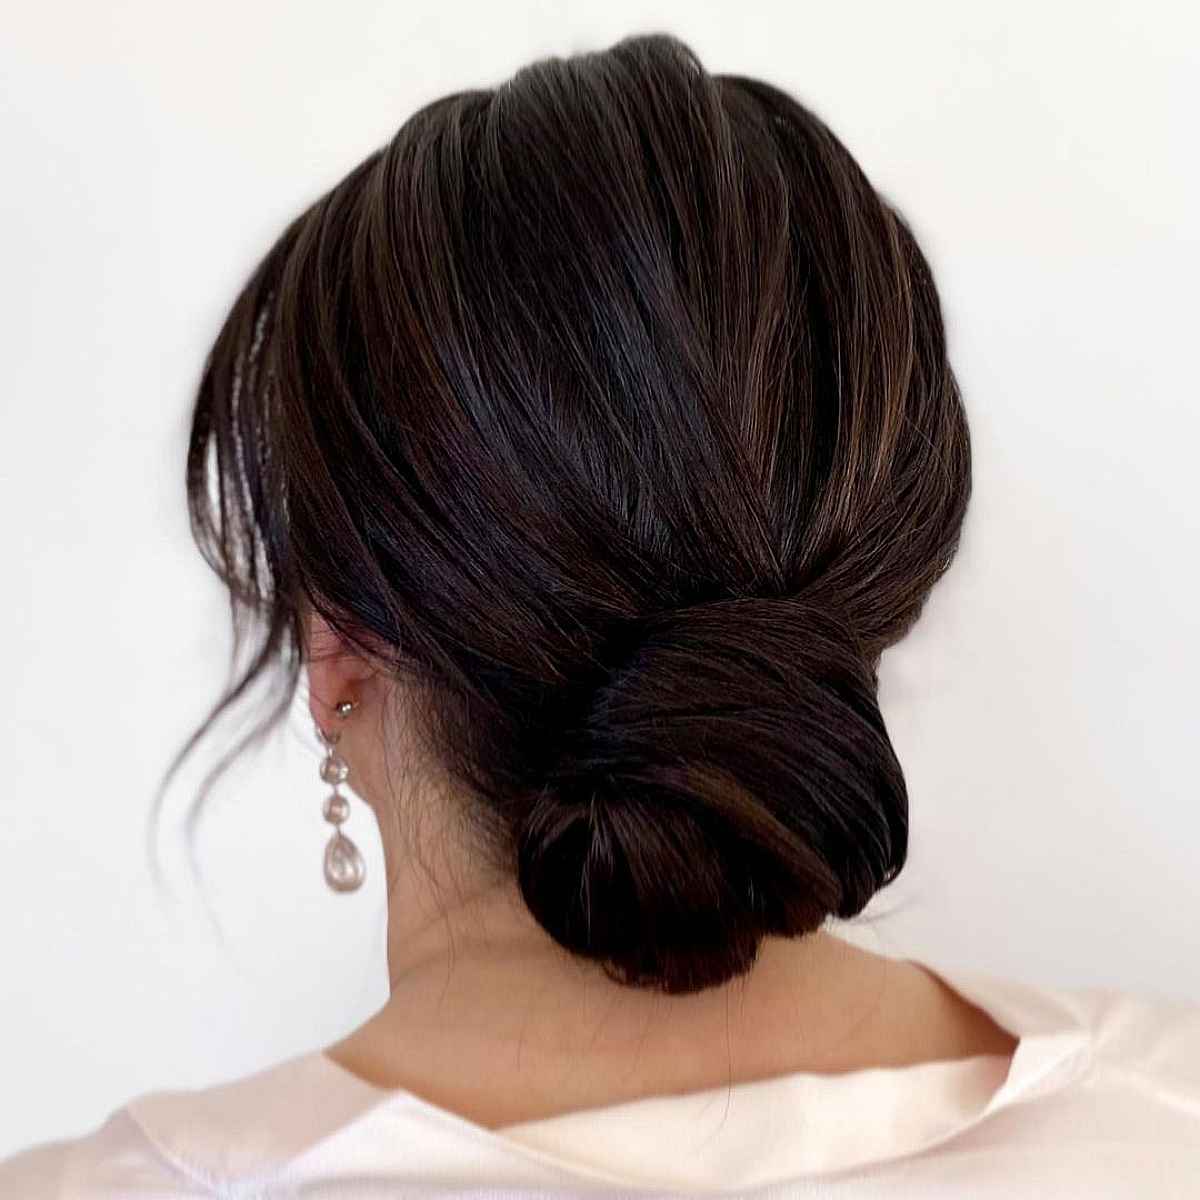 Traditional Updo Hairstyle